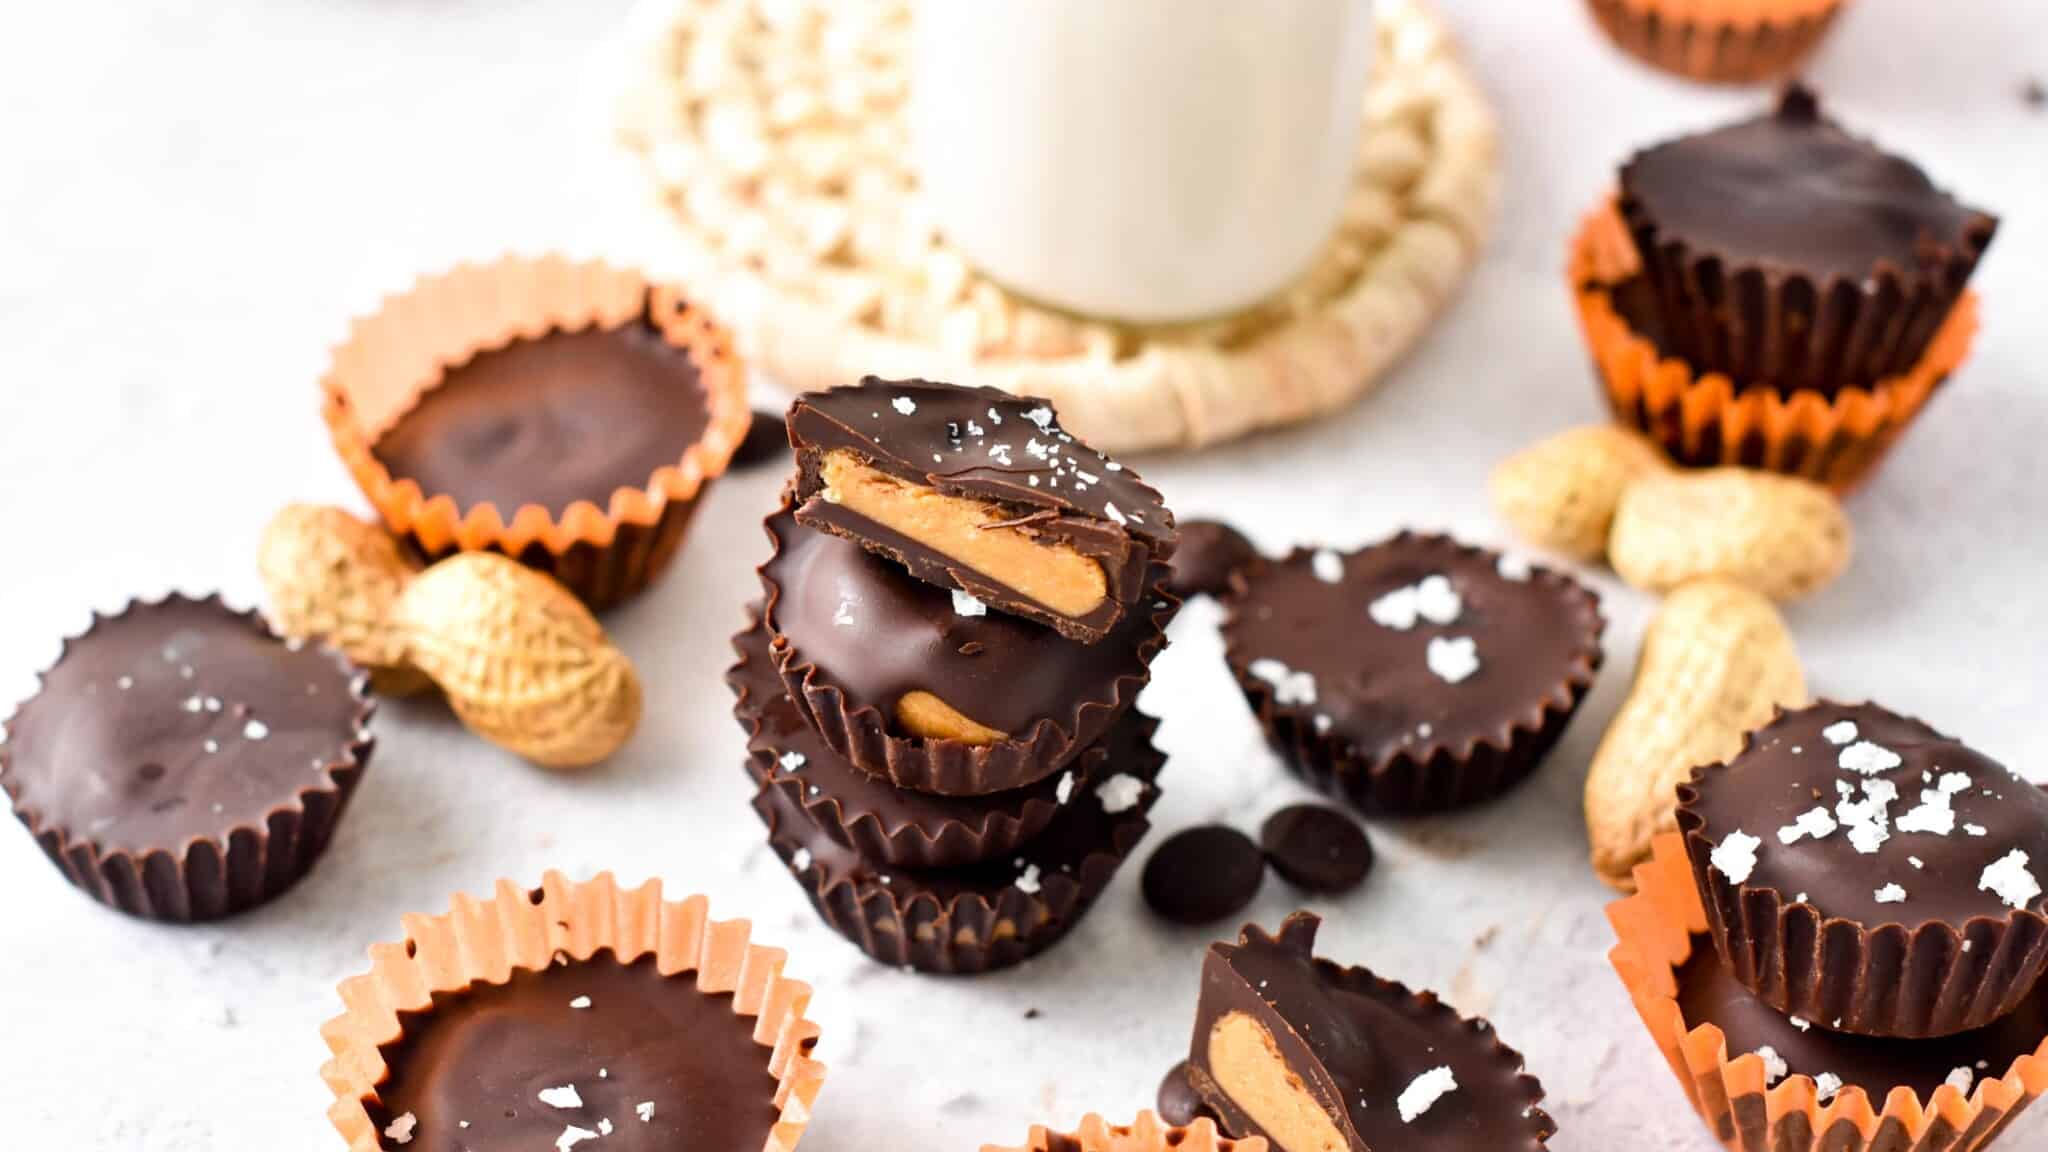 Protein Peanut Butter Cup Recipe Details